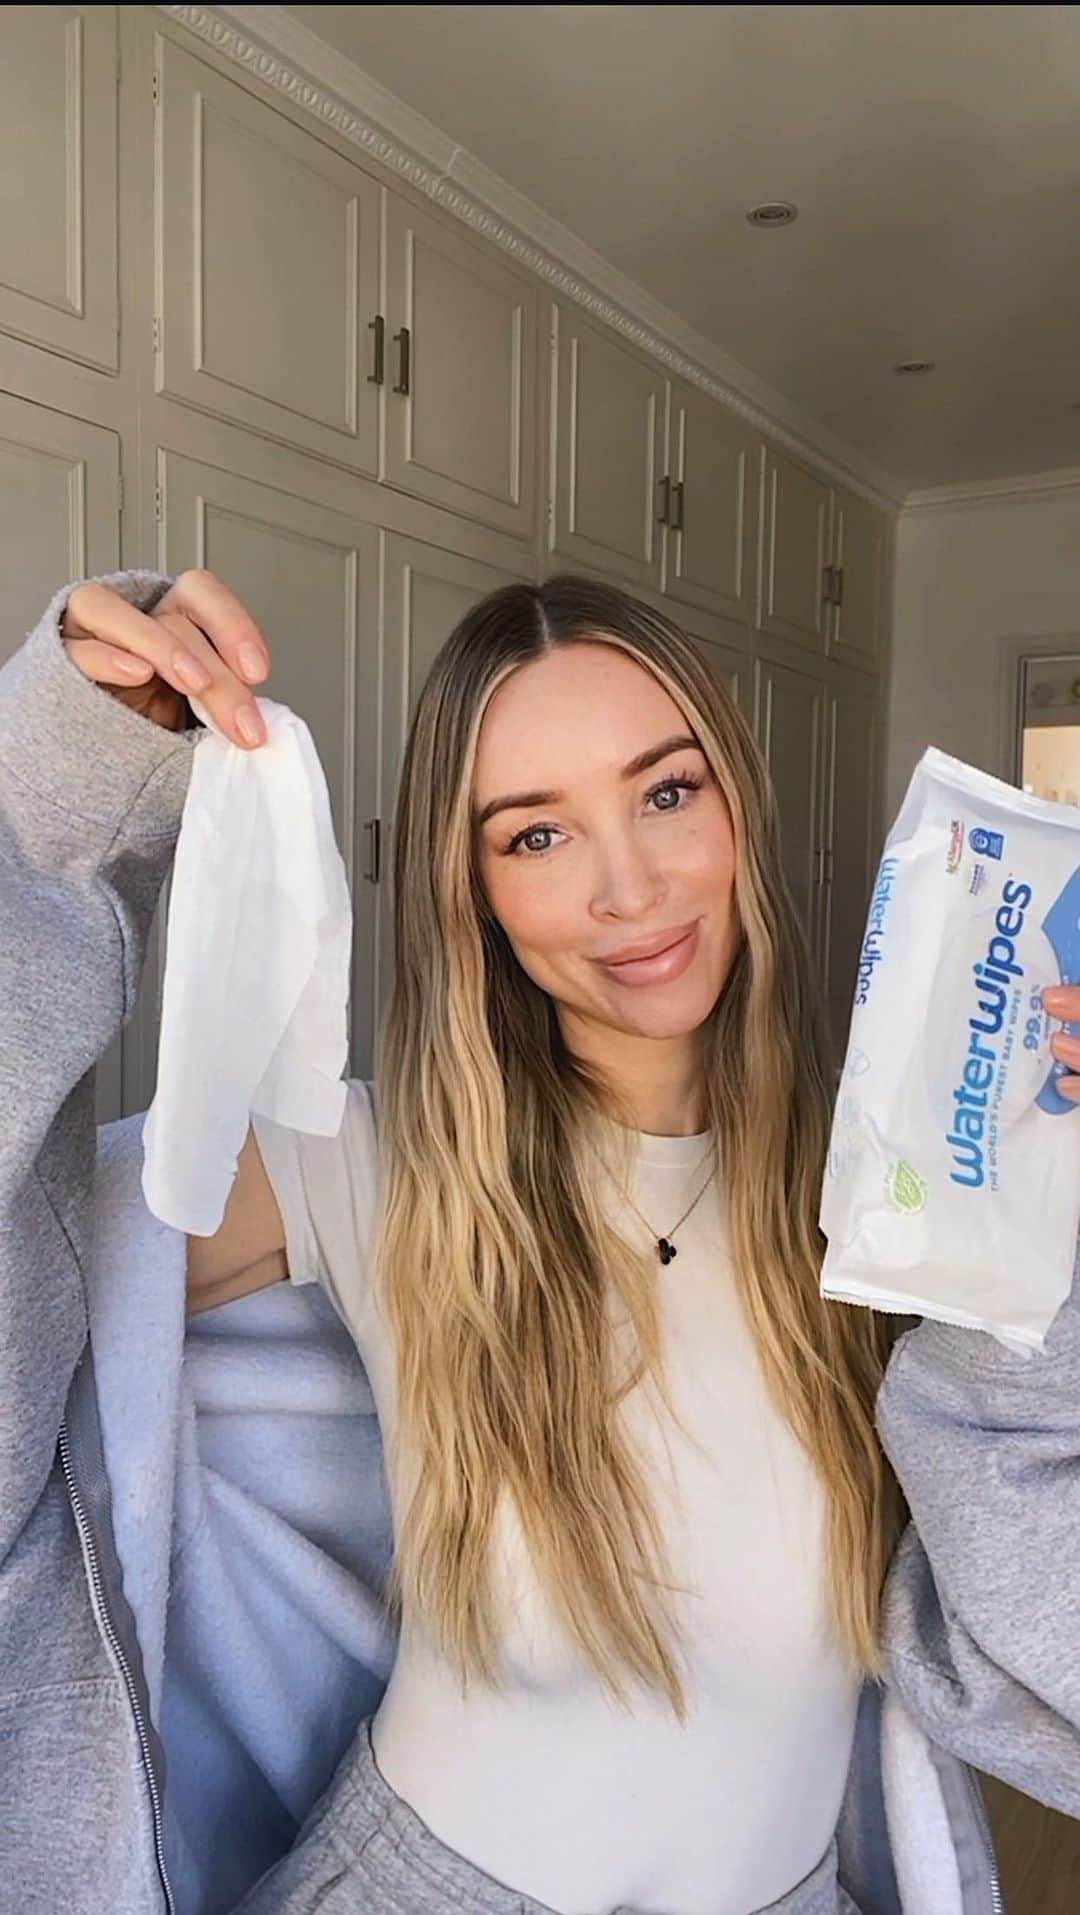 ローレン・ポープのインスタグラム：「I was today years old when I found out how not to pull out 20 wipes at a time from the pack...GAME CHANGER!!! All thanks to Tik Tok and a hairband 🤯🤯🤯  Who else does this?   Also i just want to say a big HELLO to you all, i know it’s been a while & things have been a little quiet over at The Mum Space but behind the scenes we’ve been working hard whilst also trying to juggle mum/work life but i hope you love our new look, what do you think of the new logo??   Also keep your eyes peeled on Friday for a big announcement that I hope lots of you will be happy with! I’ve finally managed to rope one of my fave mums to follow on here to officially come on board & help me keep The Mum Space thriving & with this extra pair of hands & all the exciting ideas she has already brought to the table i hope you guys will see that The Mum Space really is THE go-to safe space for mums to connect with free access to positive and impactful resources with a no-nonsense, real & relatable approach. Any guesses who it may be??  Our TMS Facebook group has been growing since we launched during lockdown 1.0 and it still amazes me to this day how many mums we’ve connected and helped during our little journey, makes me emotional just thinking about it but that was the aim of this group! The group community genuinely got me through both pregnancies and especially those early motherhood days/weeks/months, I certainly felt alot less lost and alone being able to have a group of supportive women on hand to answer my random thoughts and questions. If you are expecting or a mum, i’ll leave the group link for you in stories and btw it’s a private group (You can post anonymously if you want) so no topic is off limits, just a safe space to share advice, ask for tips and just let off some steam if you need to!   On that note I will hopefully see some of you over on the group but I will be back Friday with our exciting announcement, see you then!」